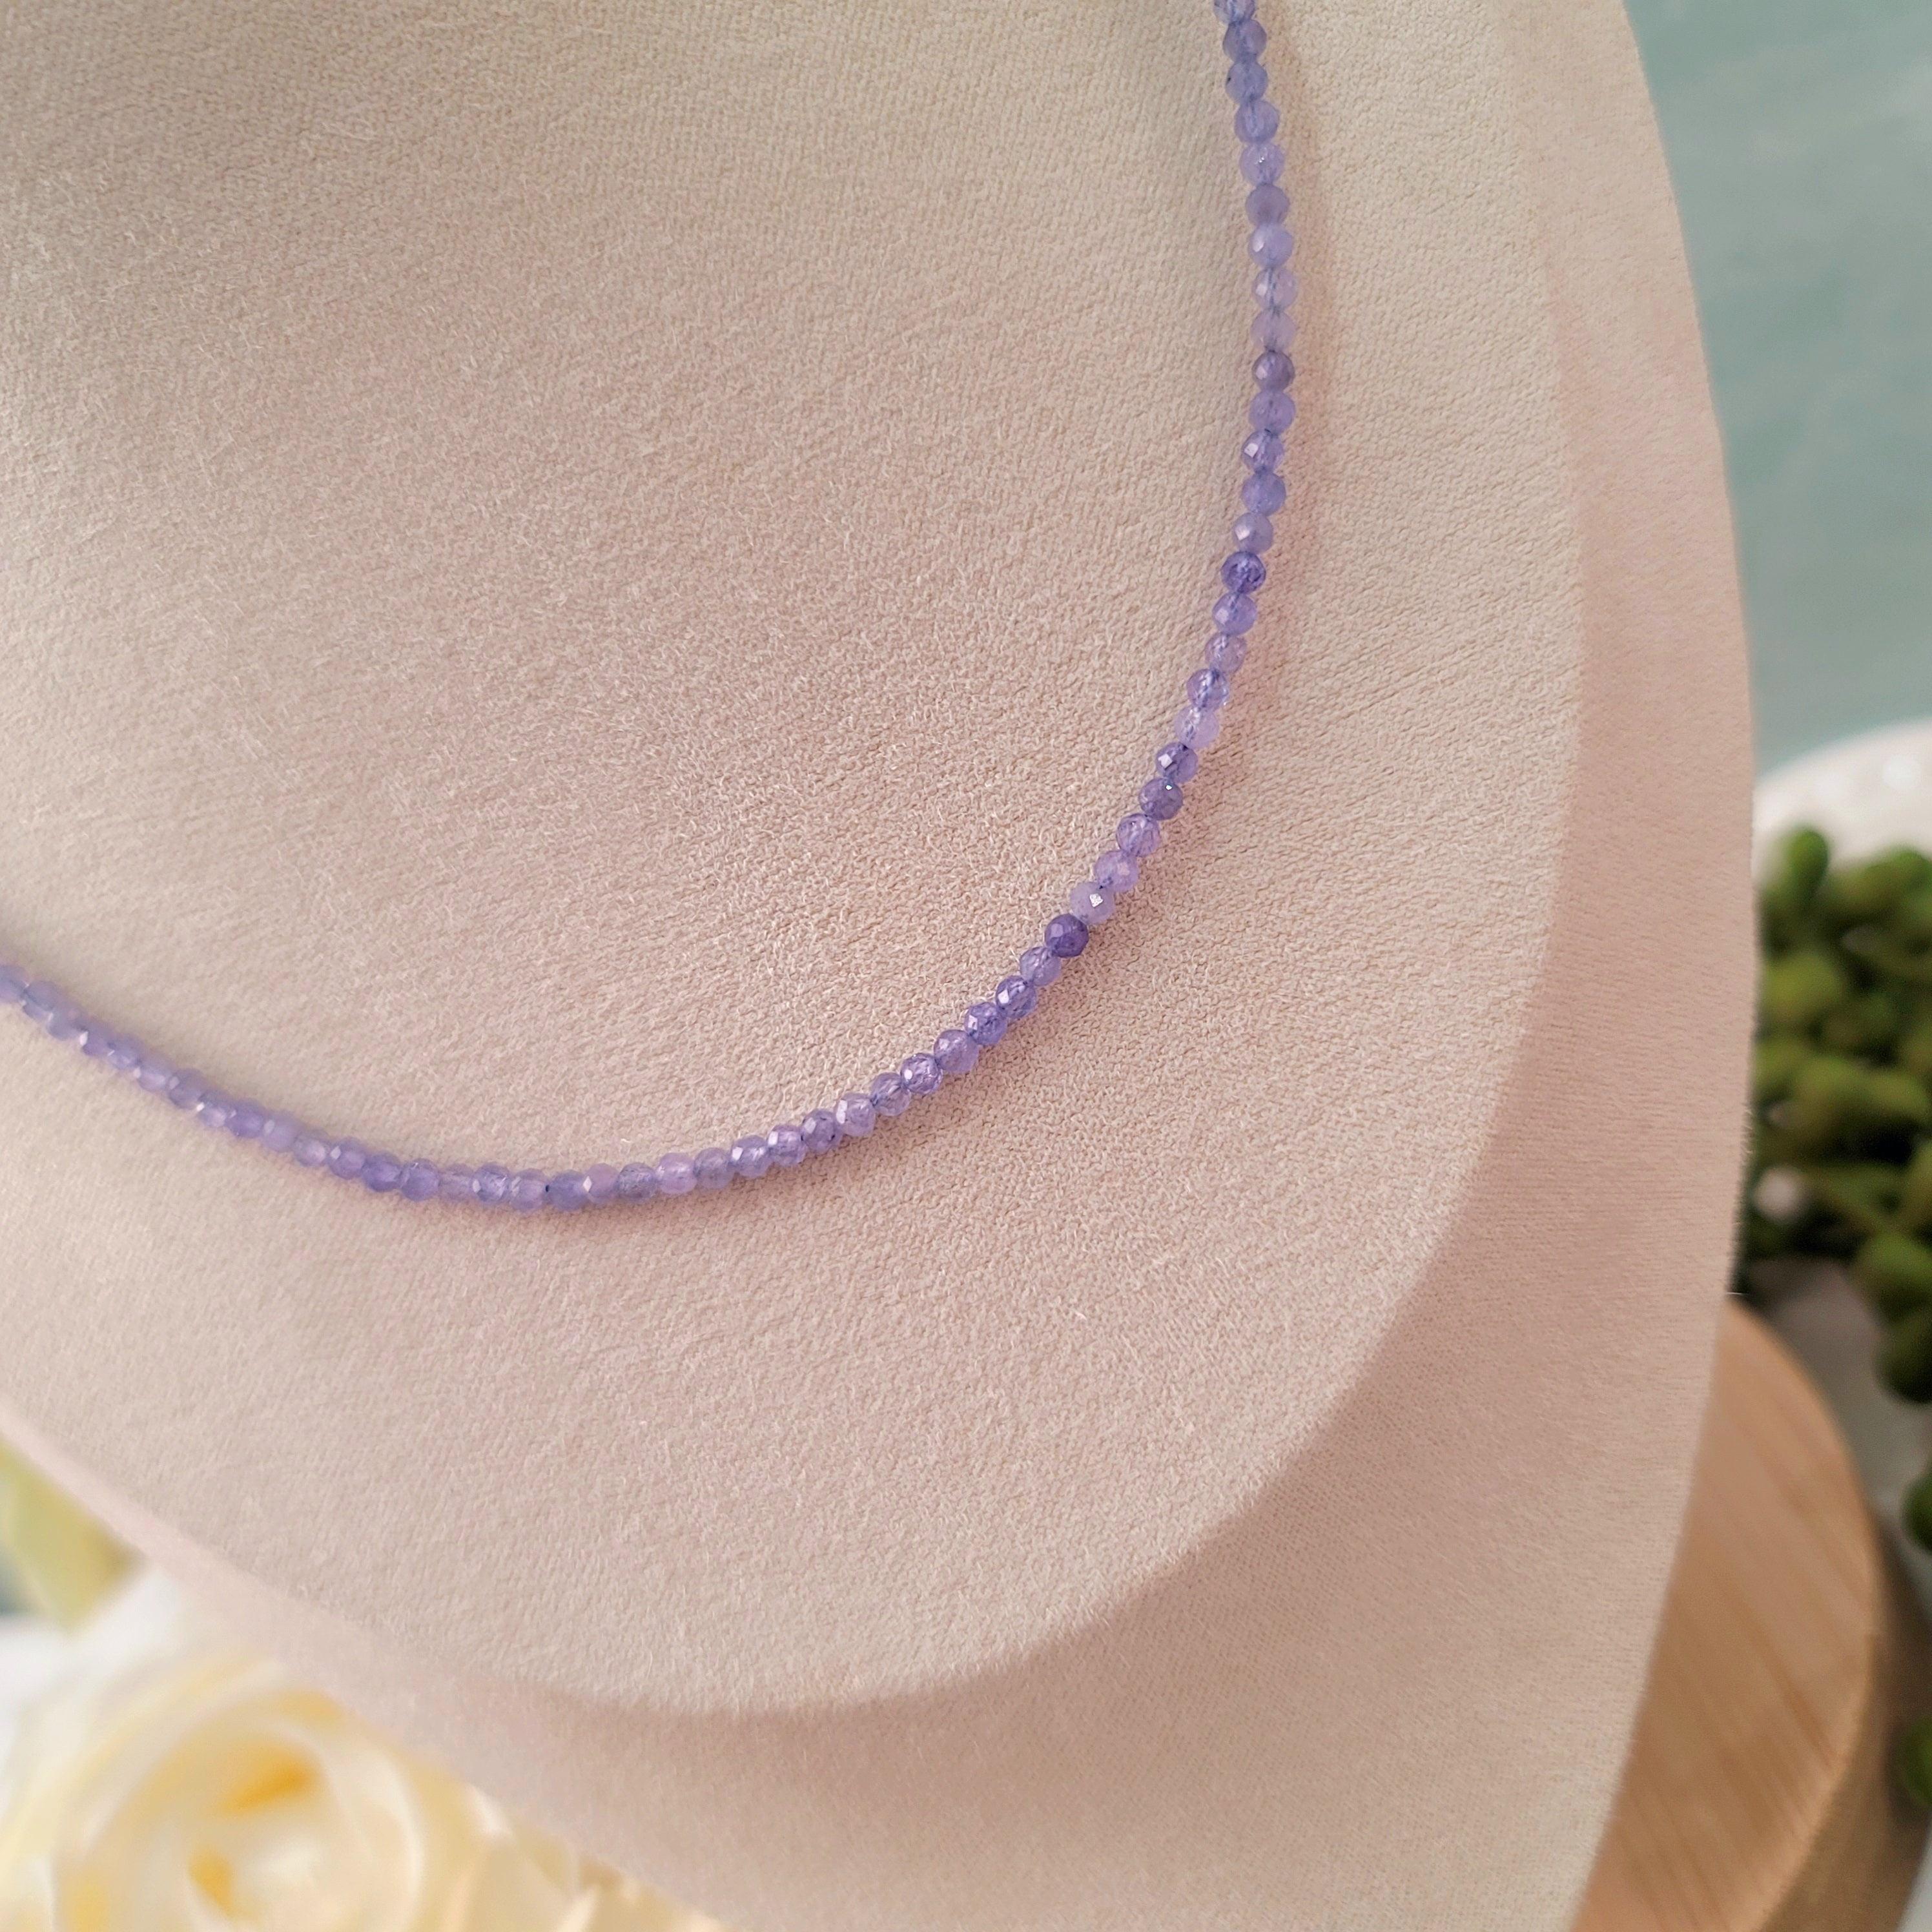 Tanzanite Micro Faceted Choker/Layering Necklace for Compassion, Intuition & Raising your Vibration